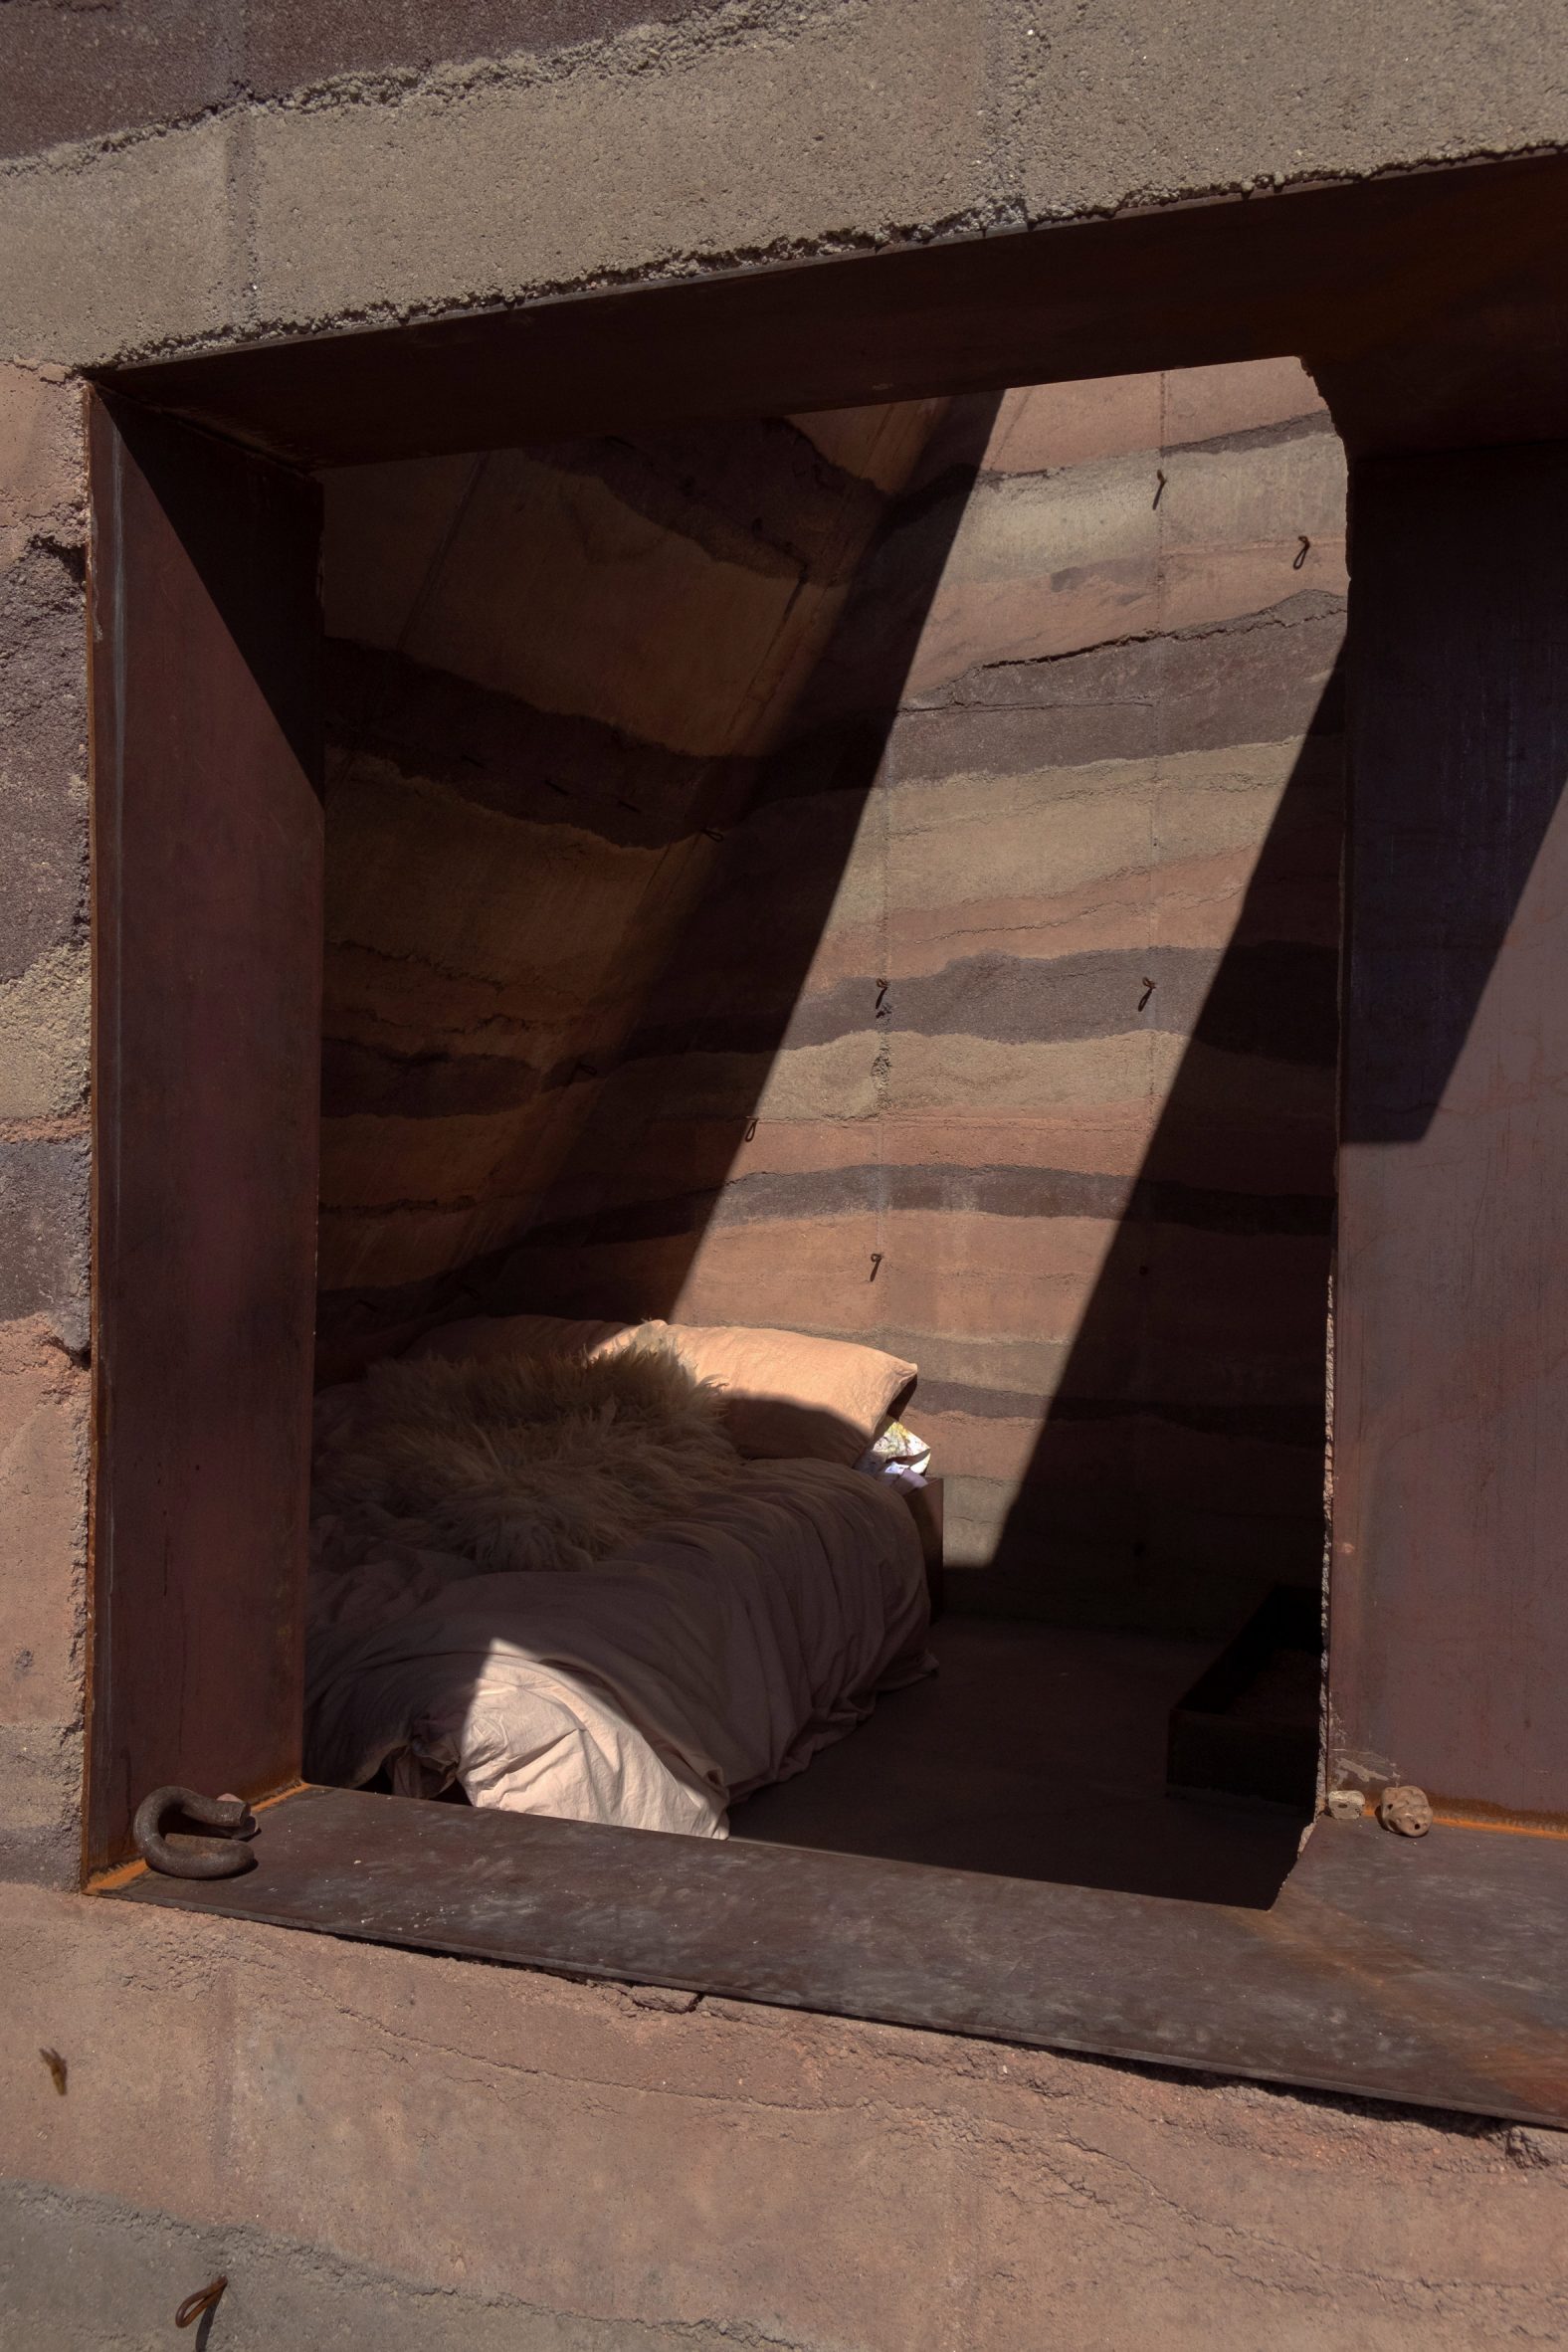 rammed earth shelter through the window